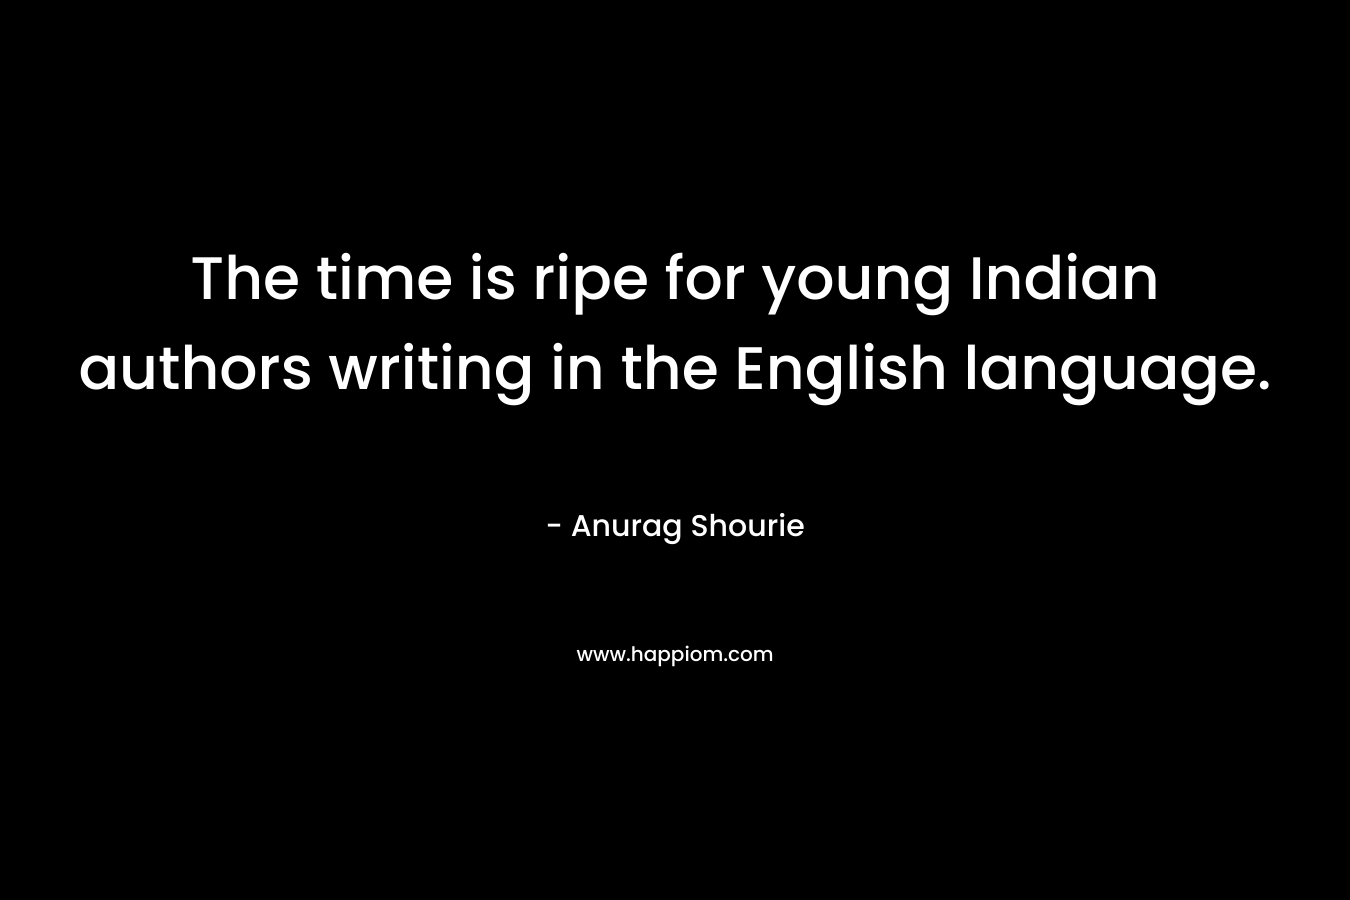 The time is ripe for young Indian authors writing in the English language.